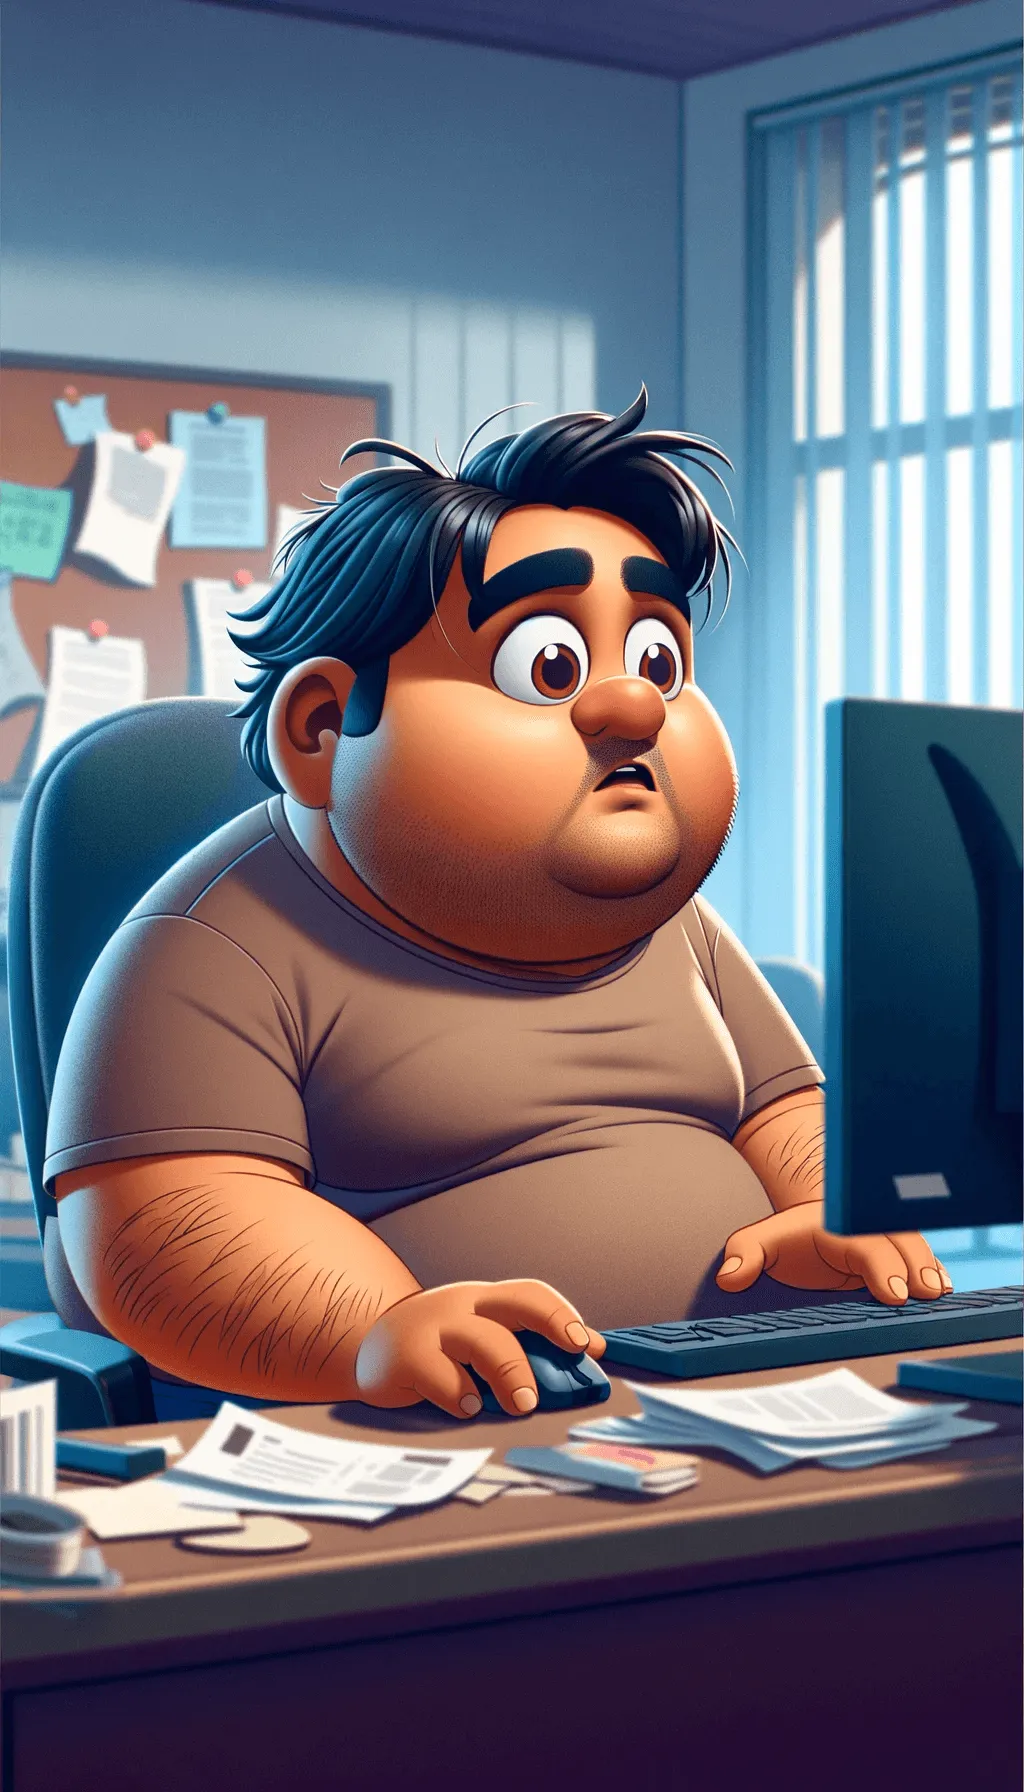 Generated image of an overweight person with a fair complexion looking at a monitor screen with a worried look on his face.